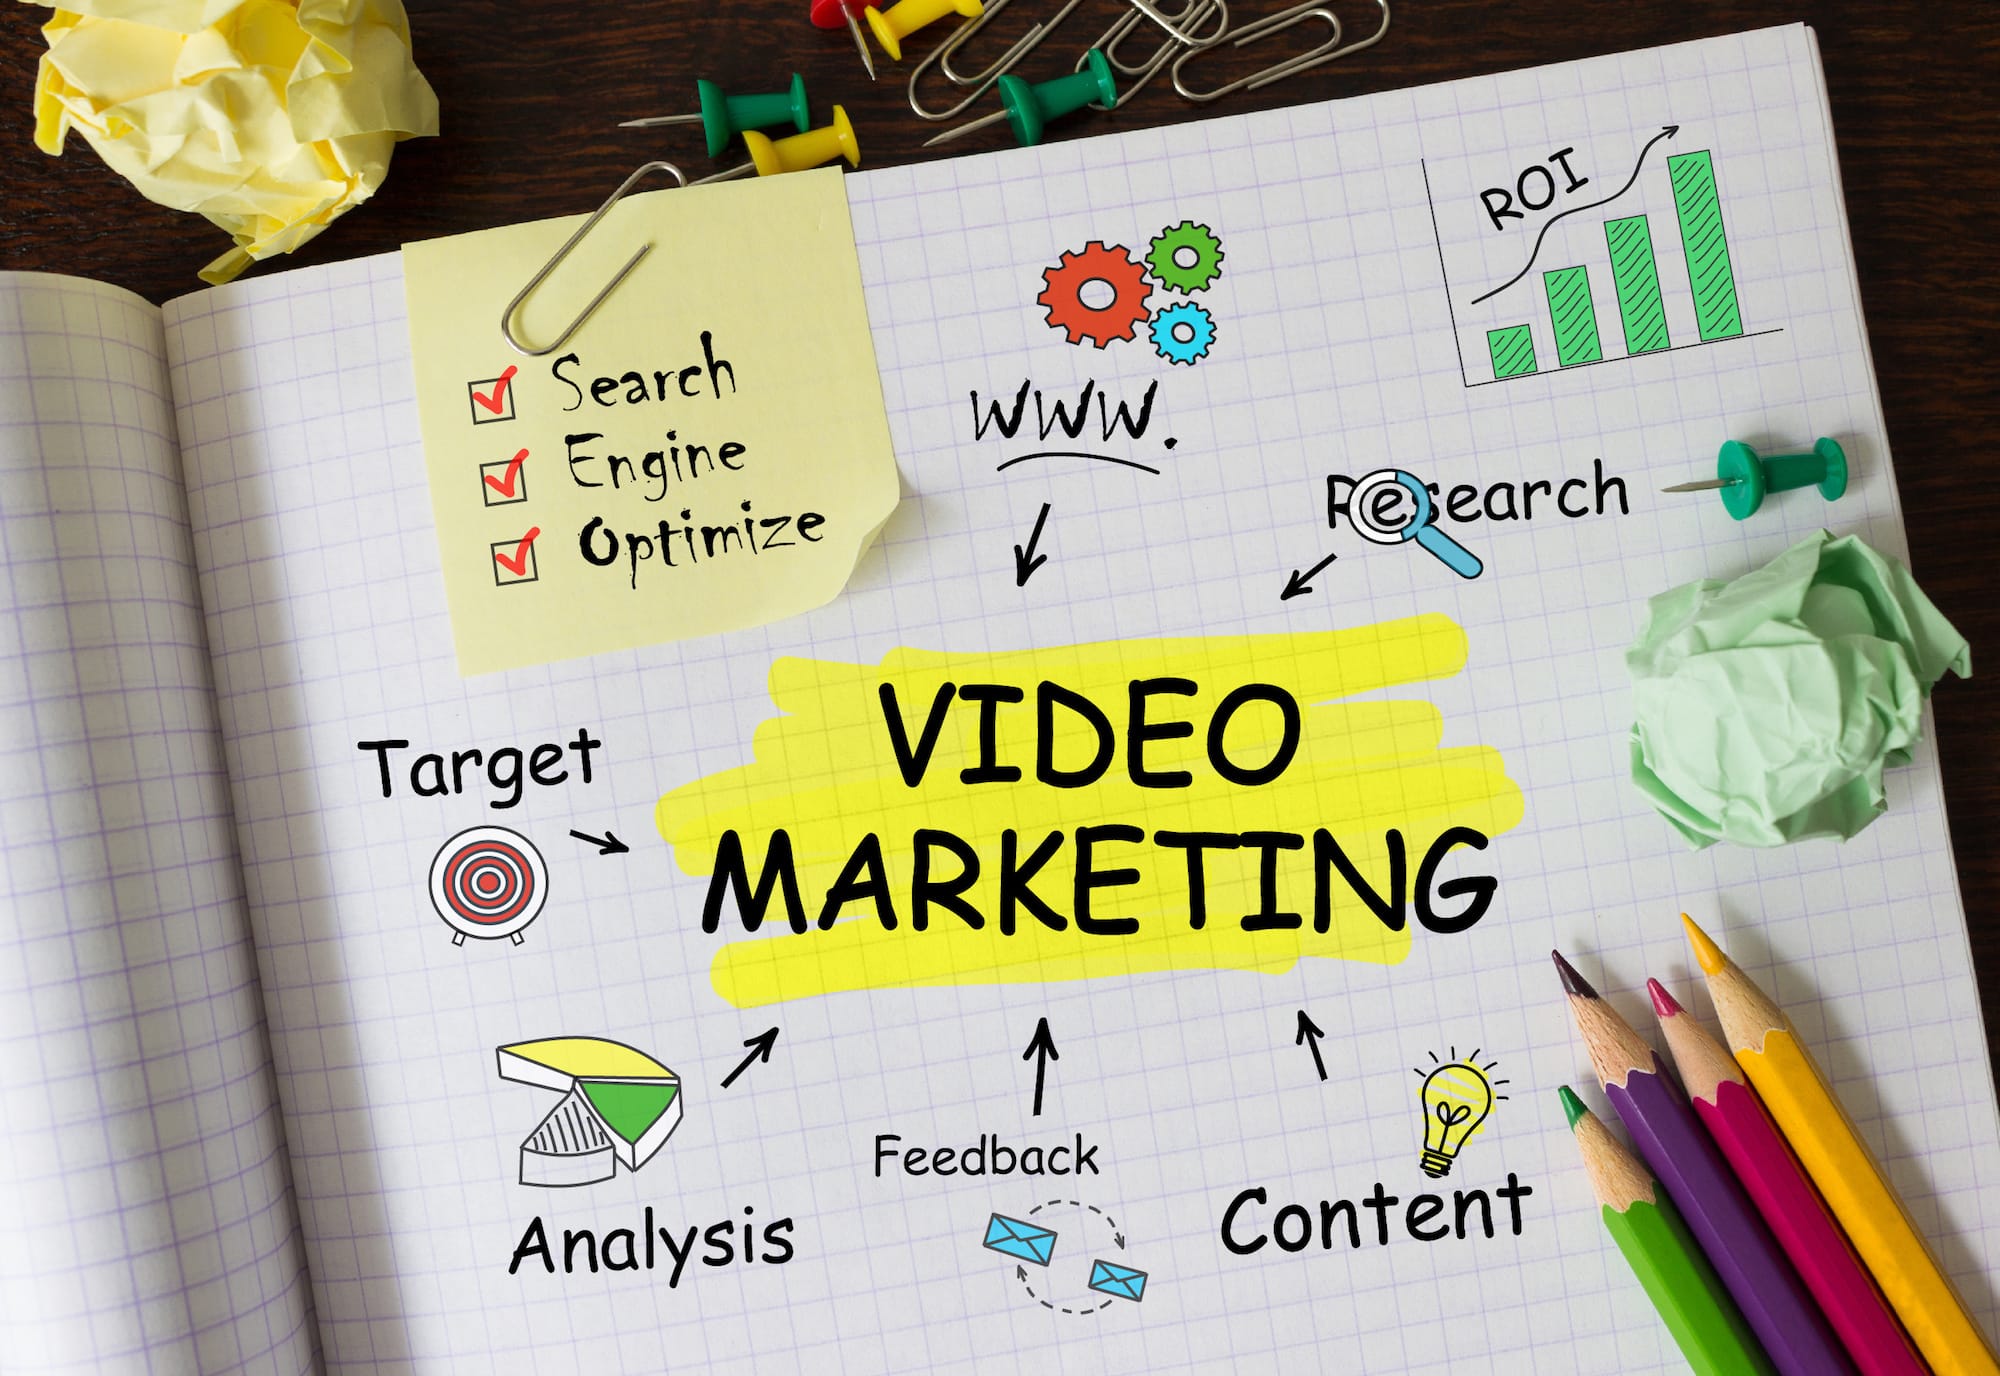 Notebook with Tools and Notes About Video Marketing, concept